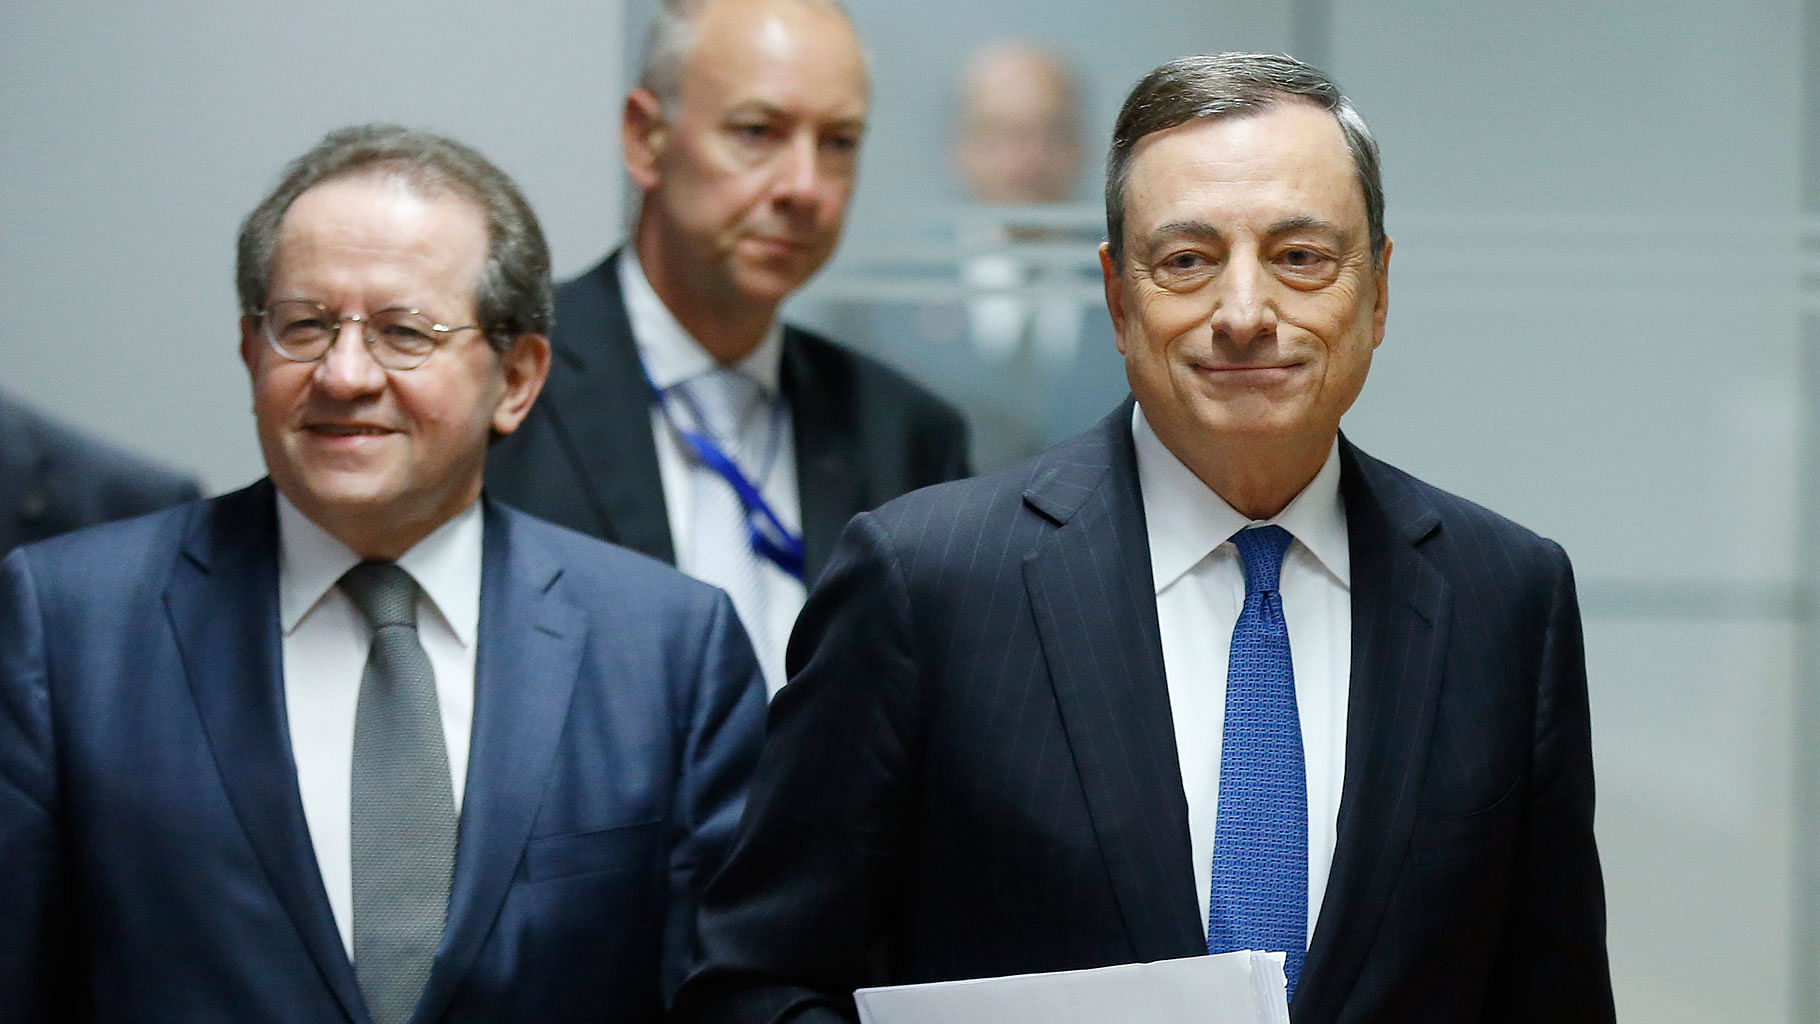 President of European Central Bank Mario Draghi (right) and vice president Vitor Constancio  following a meeting of the governing council in Frankfurt, Germany. (Photo: AP)